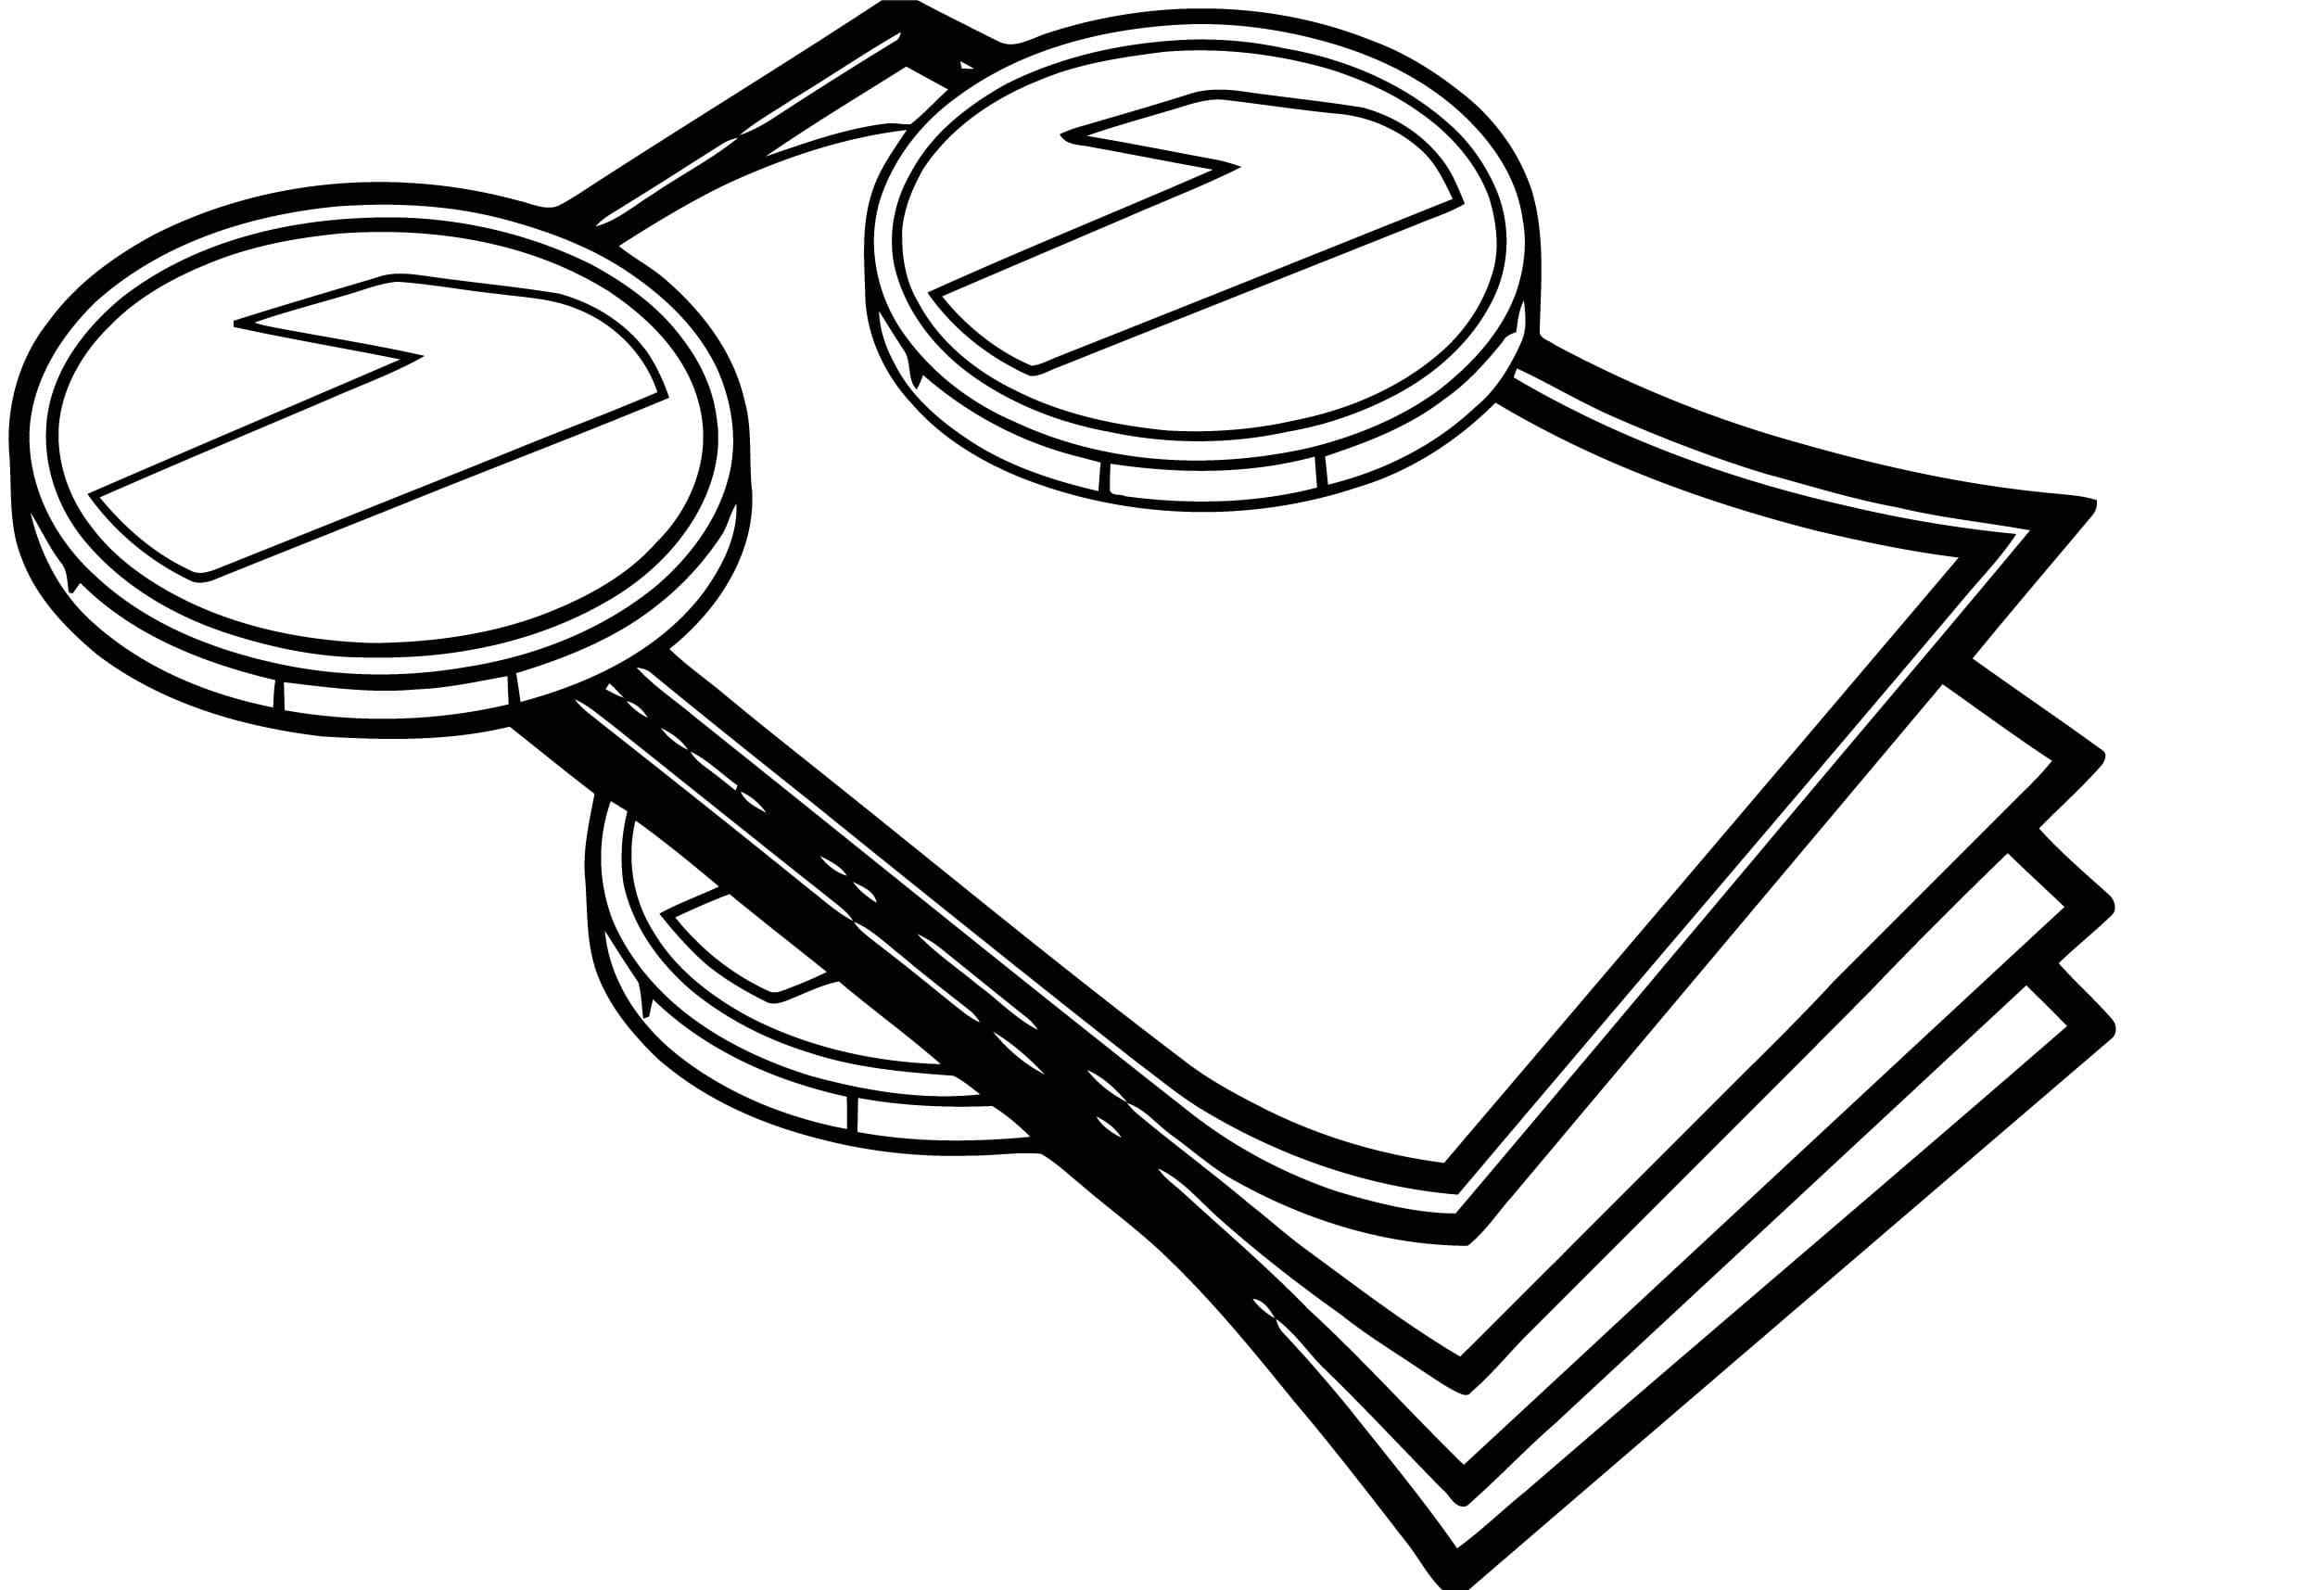 Personal Savings Coloring Page